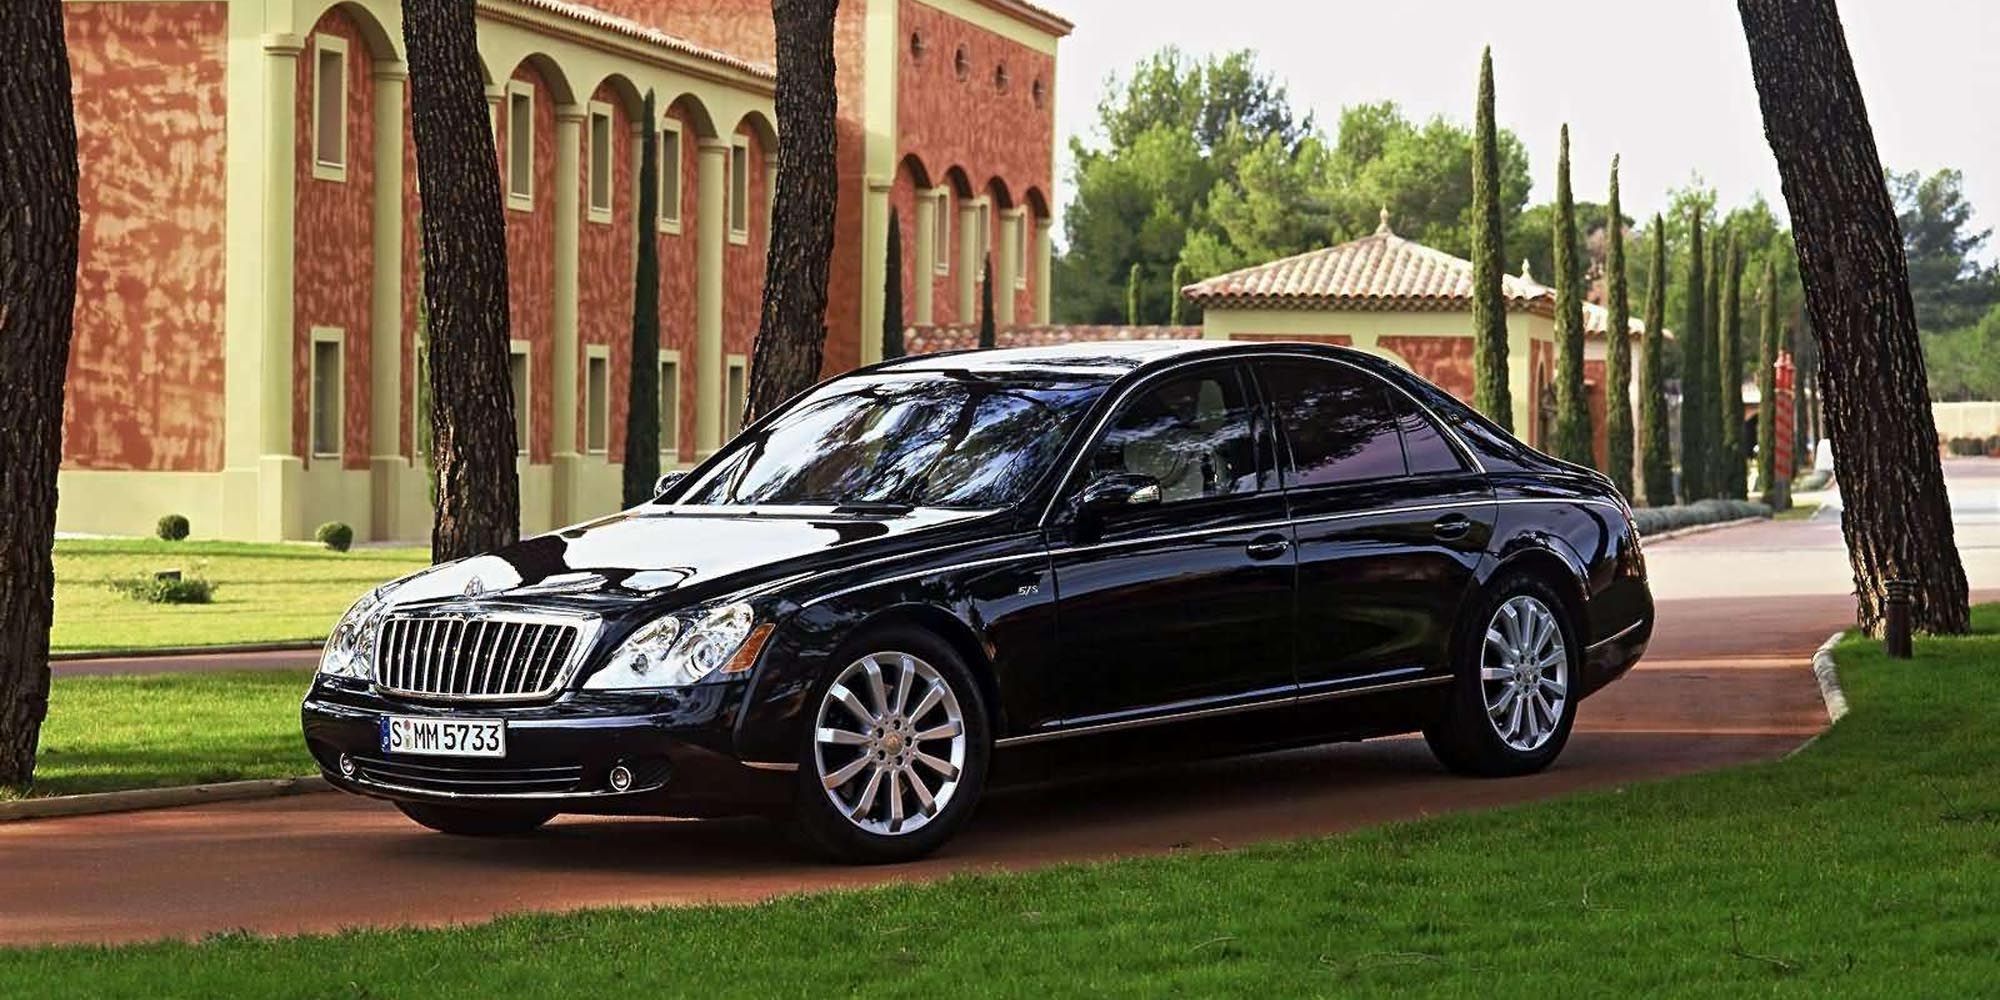 The Maybach 57 S Special in black